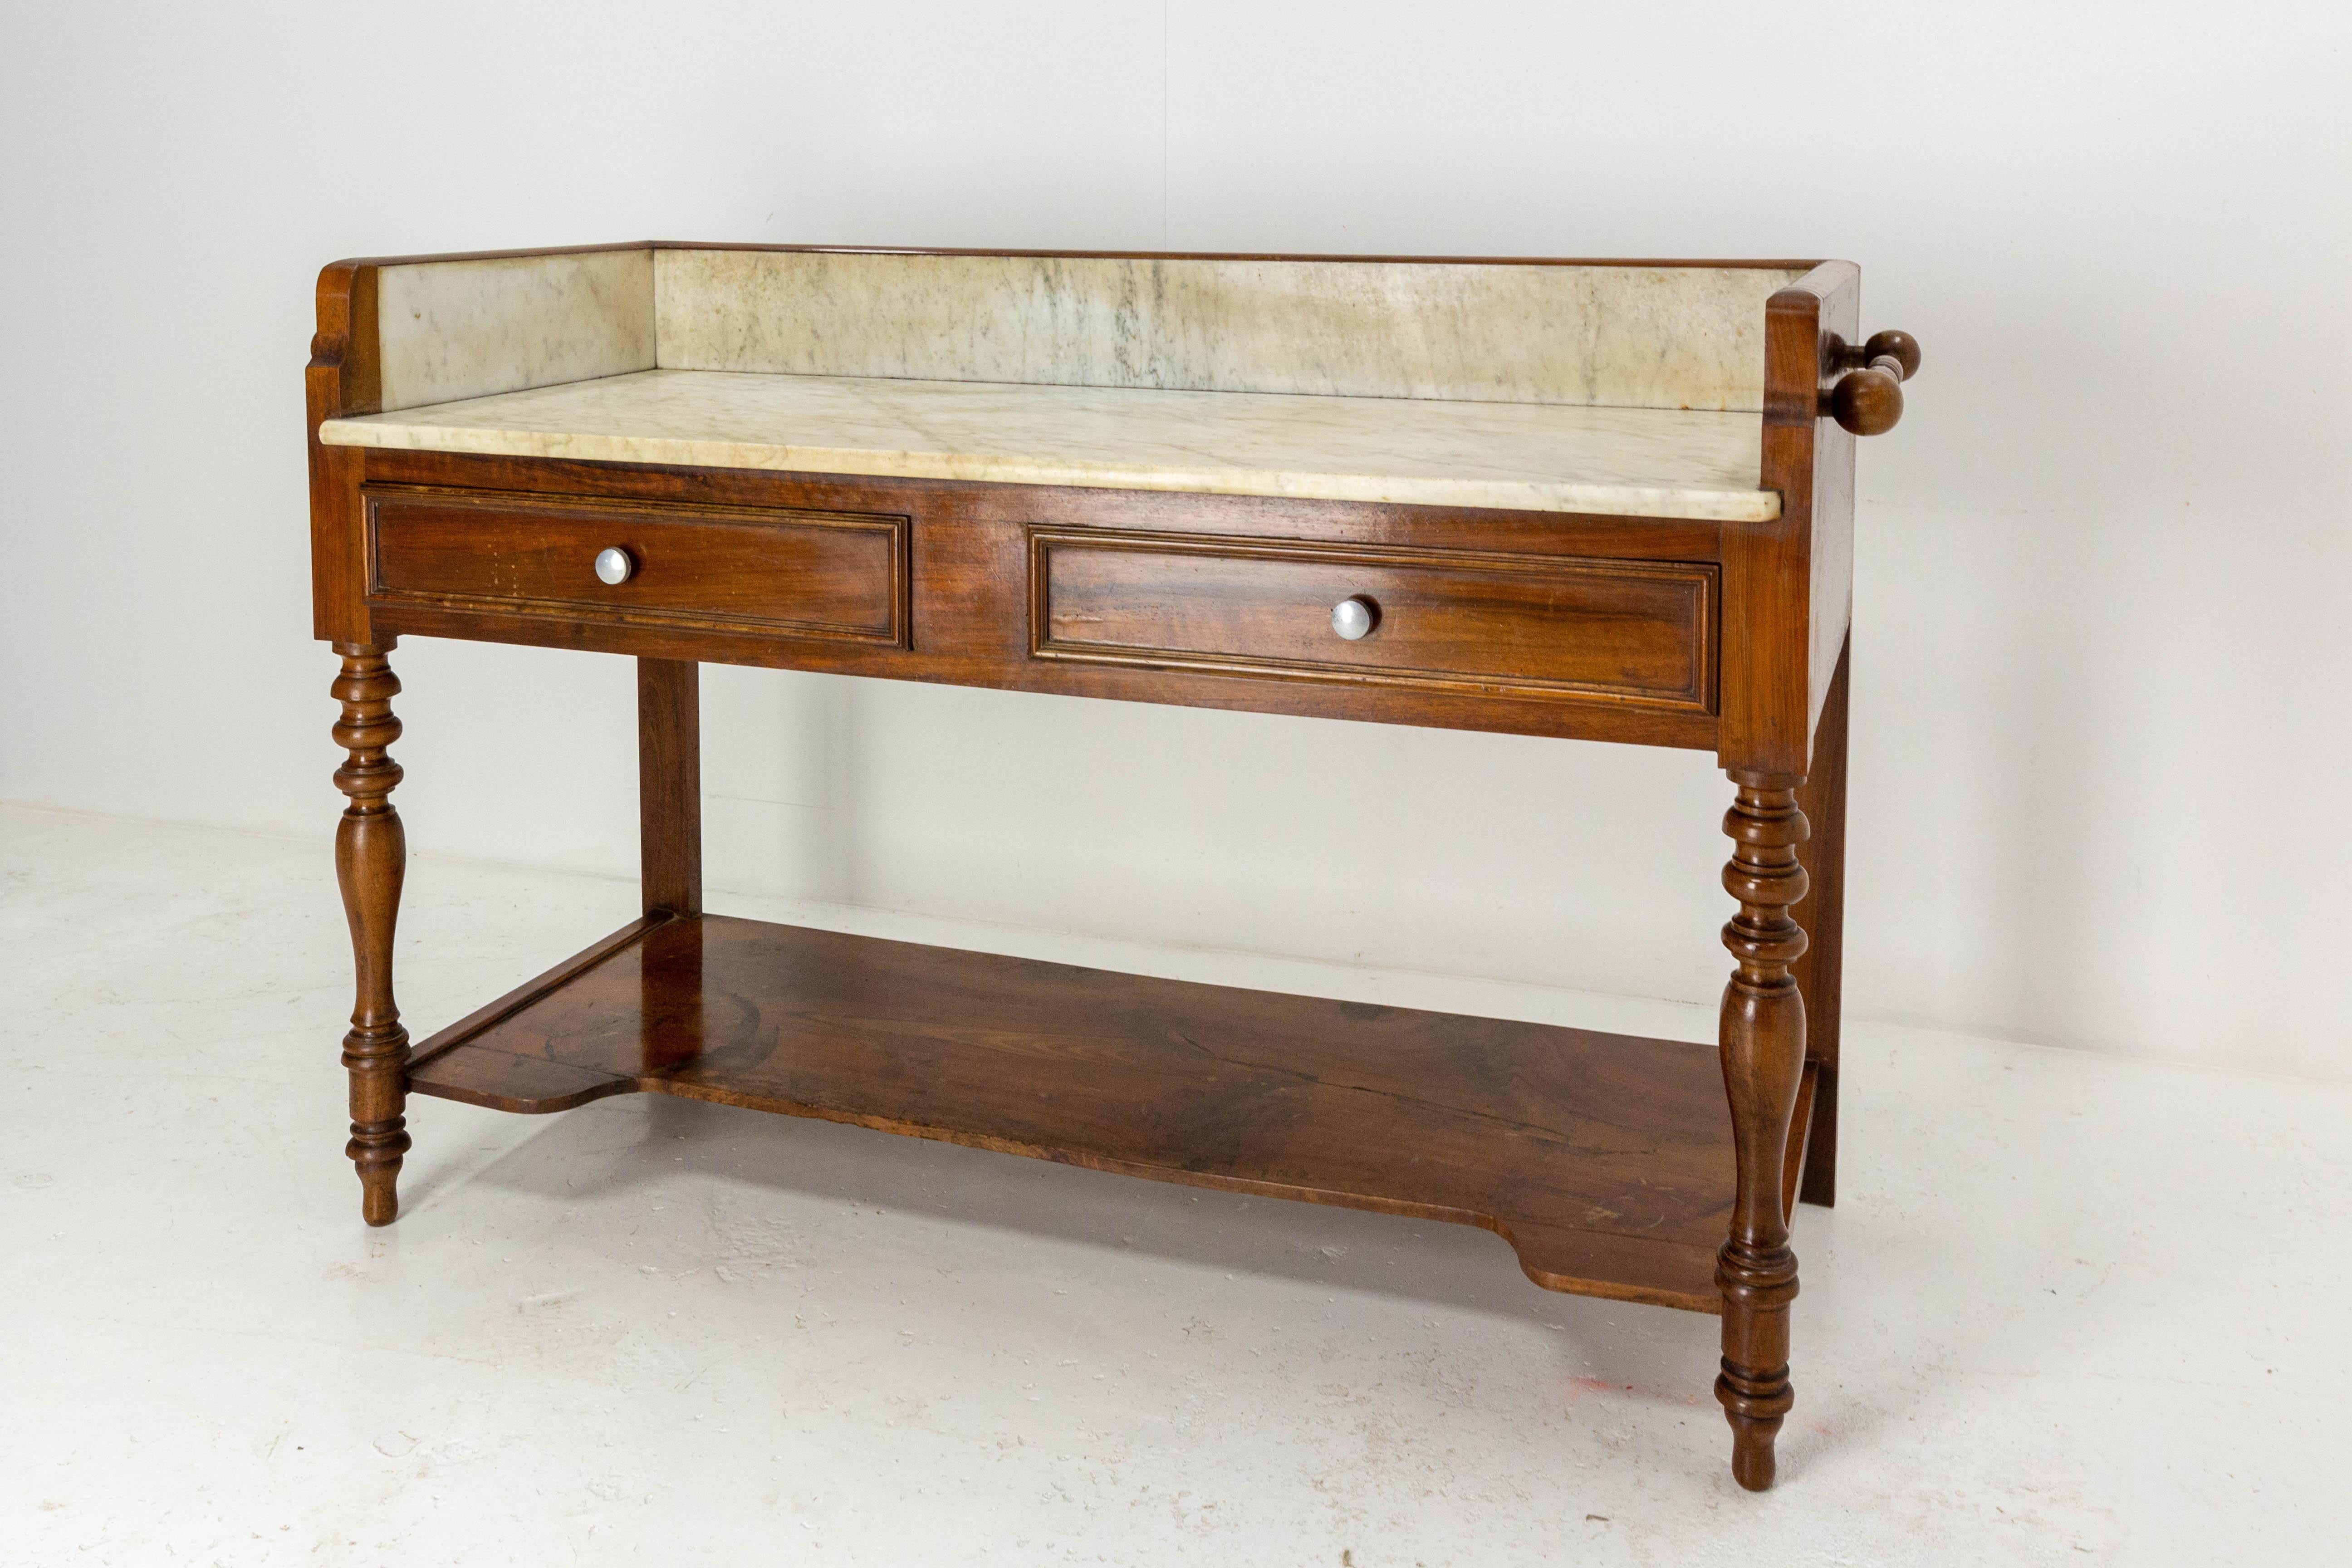 20th Century Marble and Walnut Vanity Table, French, circa 1900